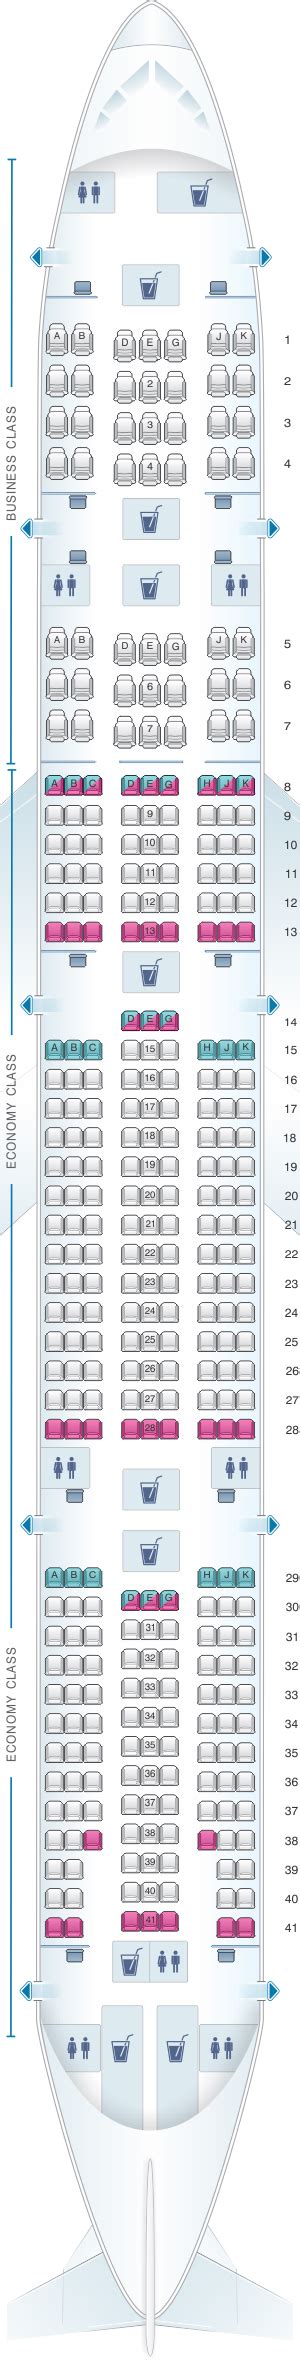 Turkish Airlines 777 300er Business Class Seat Map Two Birds Home